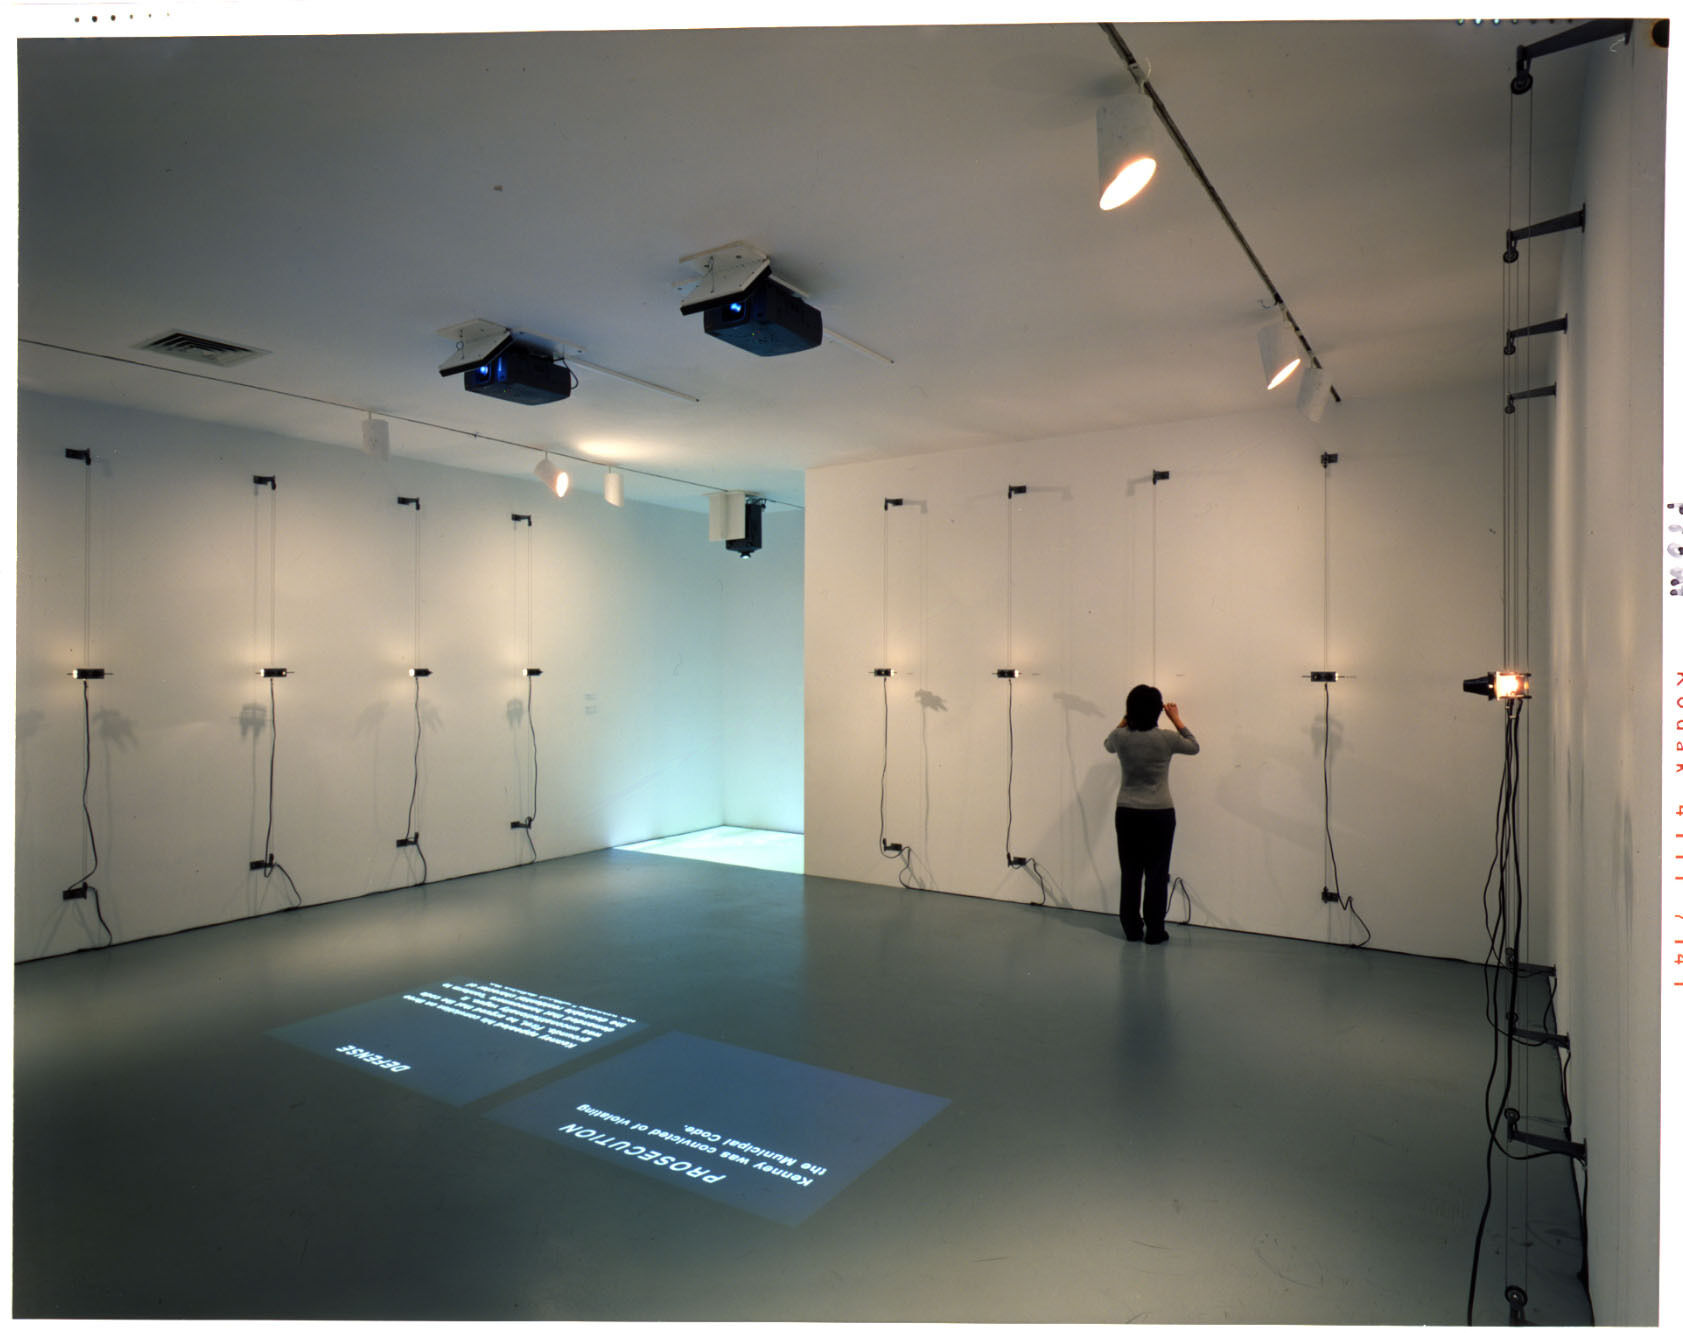 A gallery with two projectors on the ceiling projecting text on the ground.